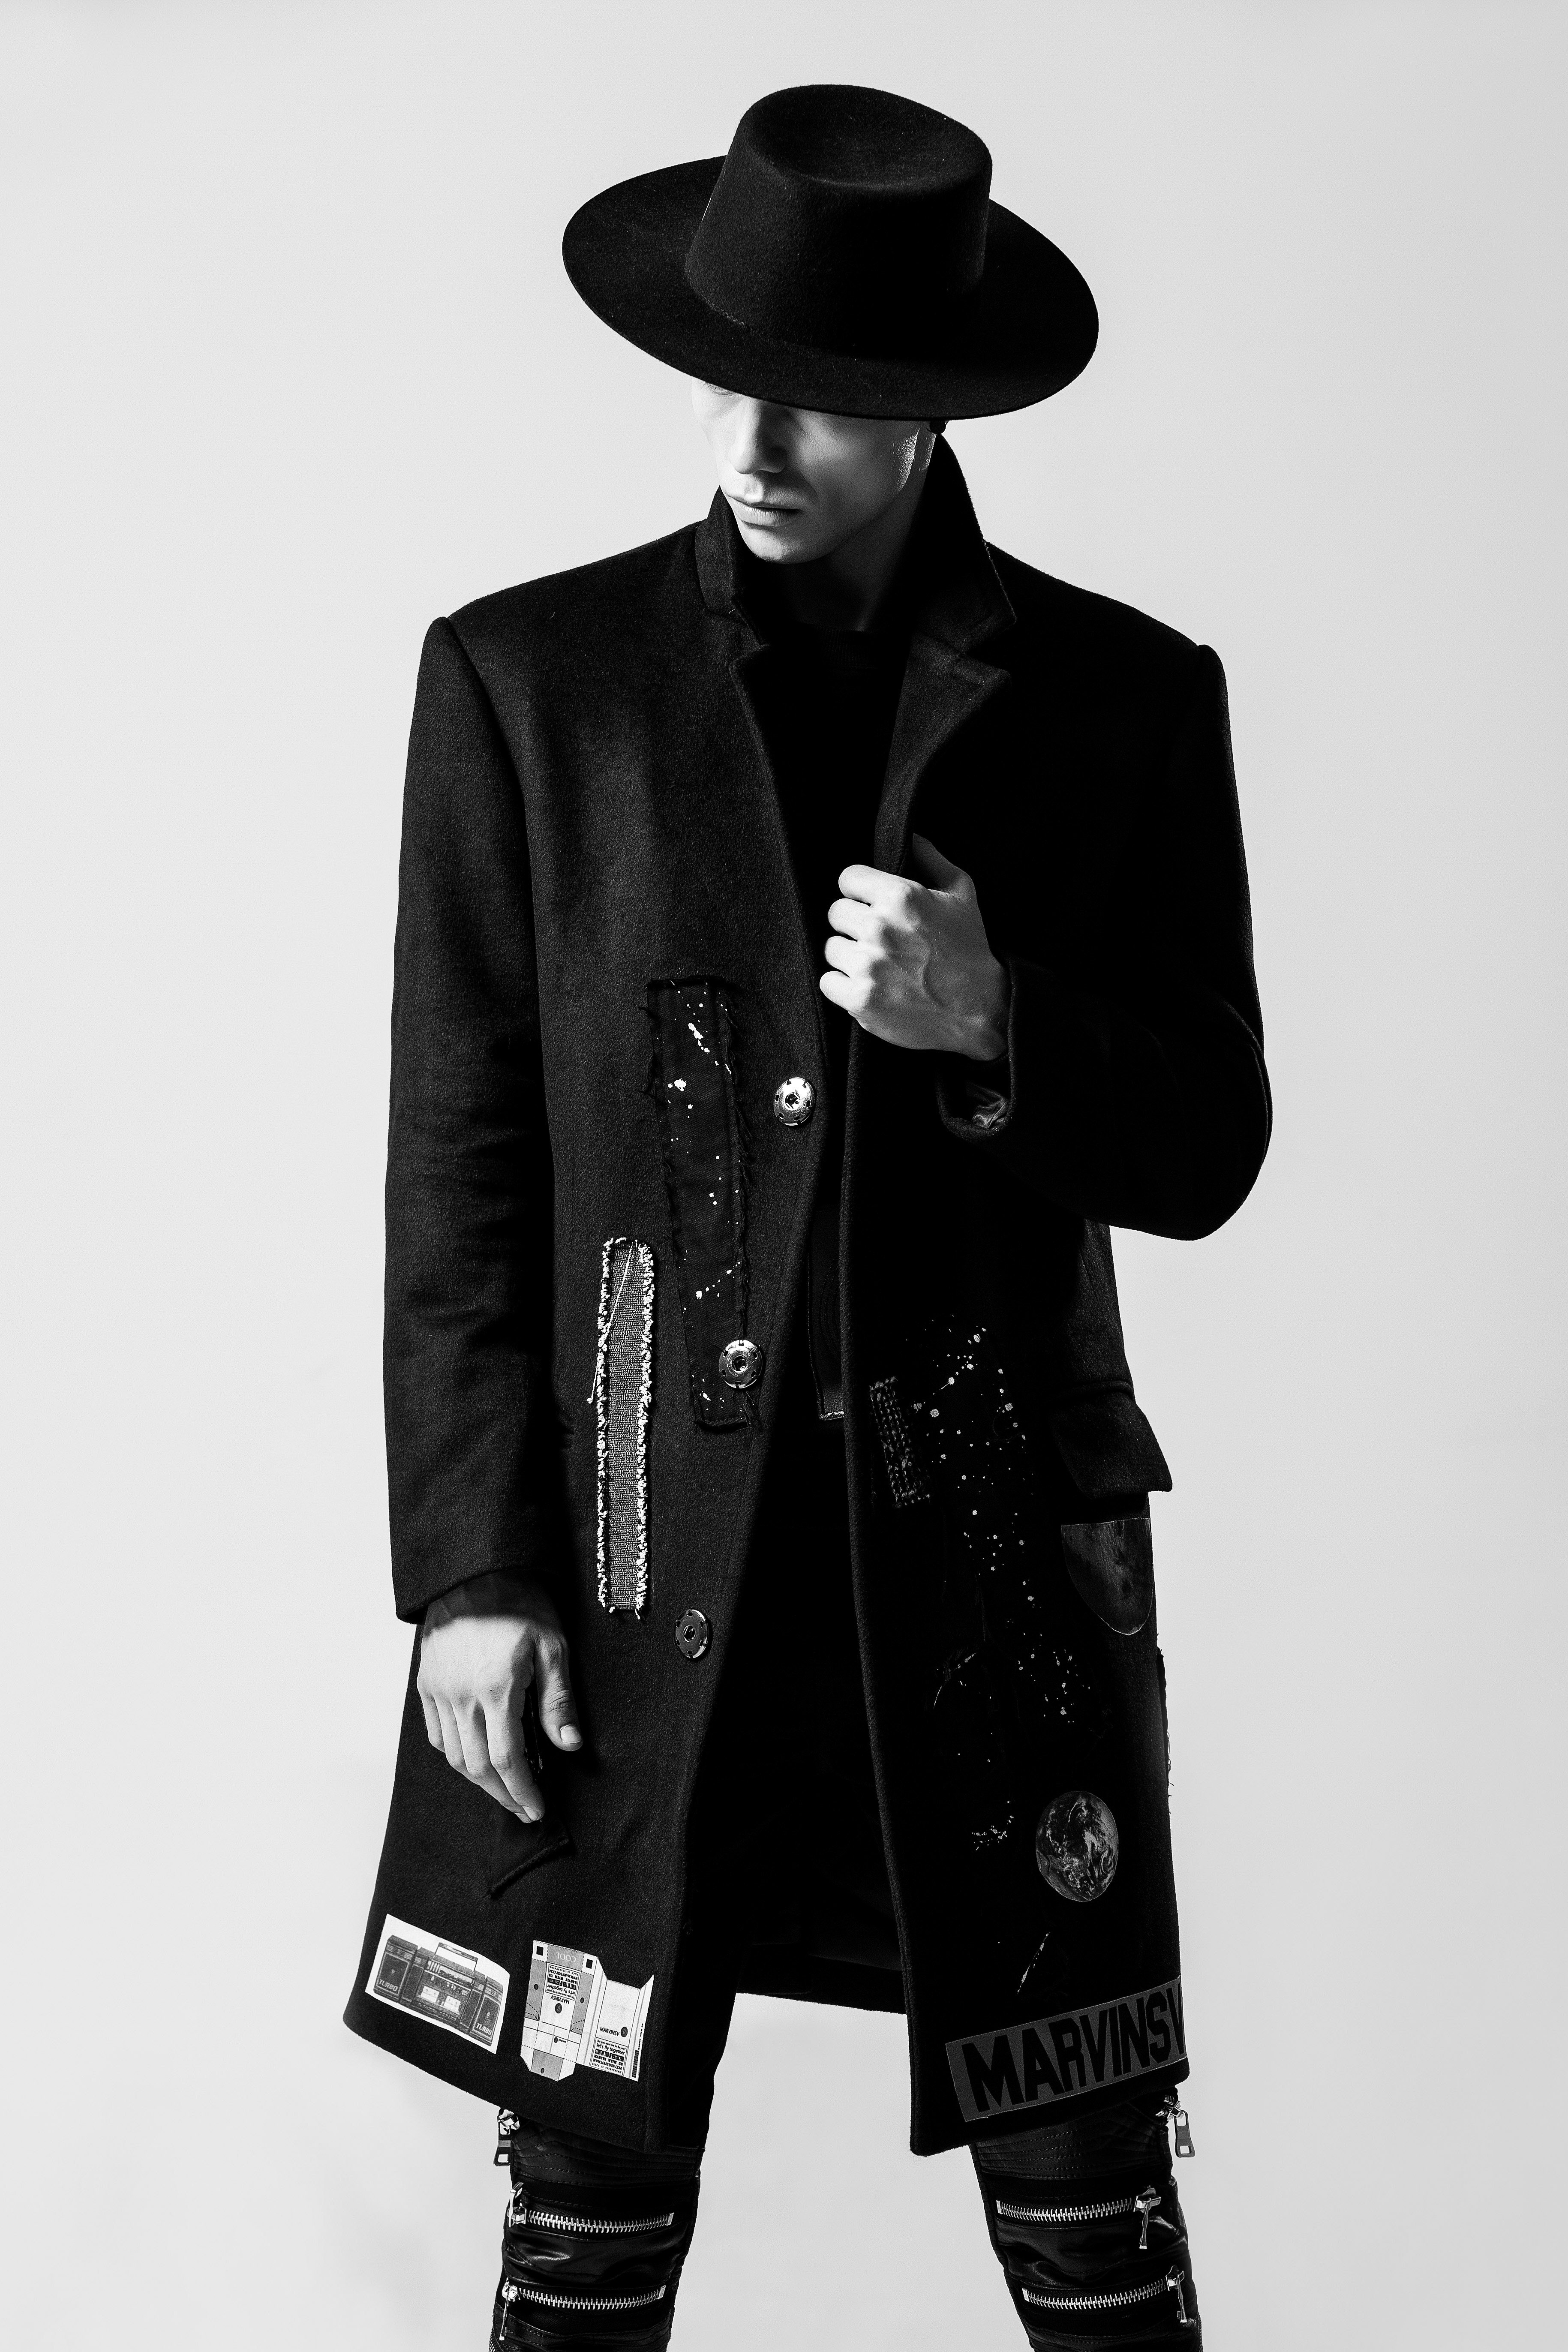 Free photo: Man Wearing Black Hat and Black Coat - Adult, Black-and ...